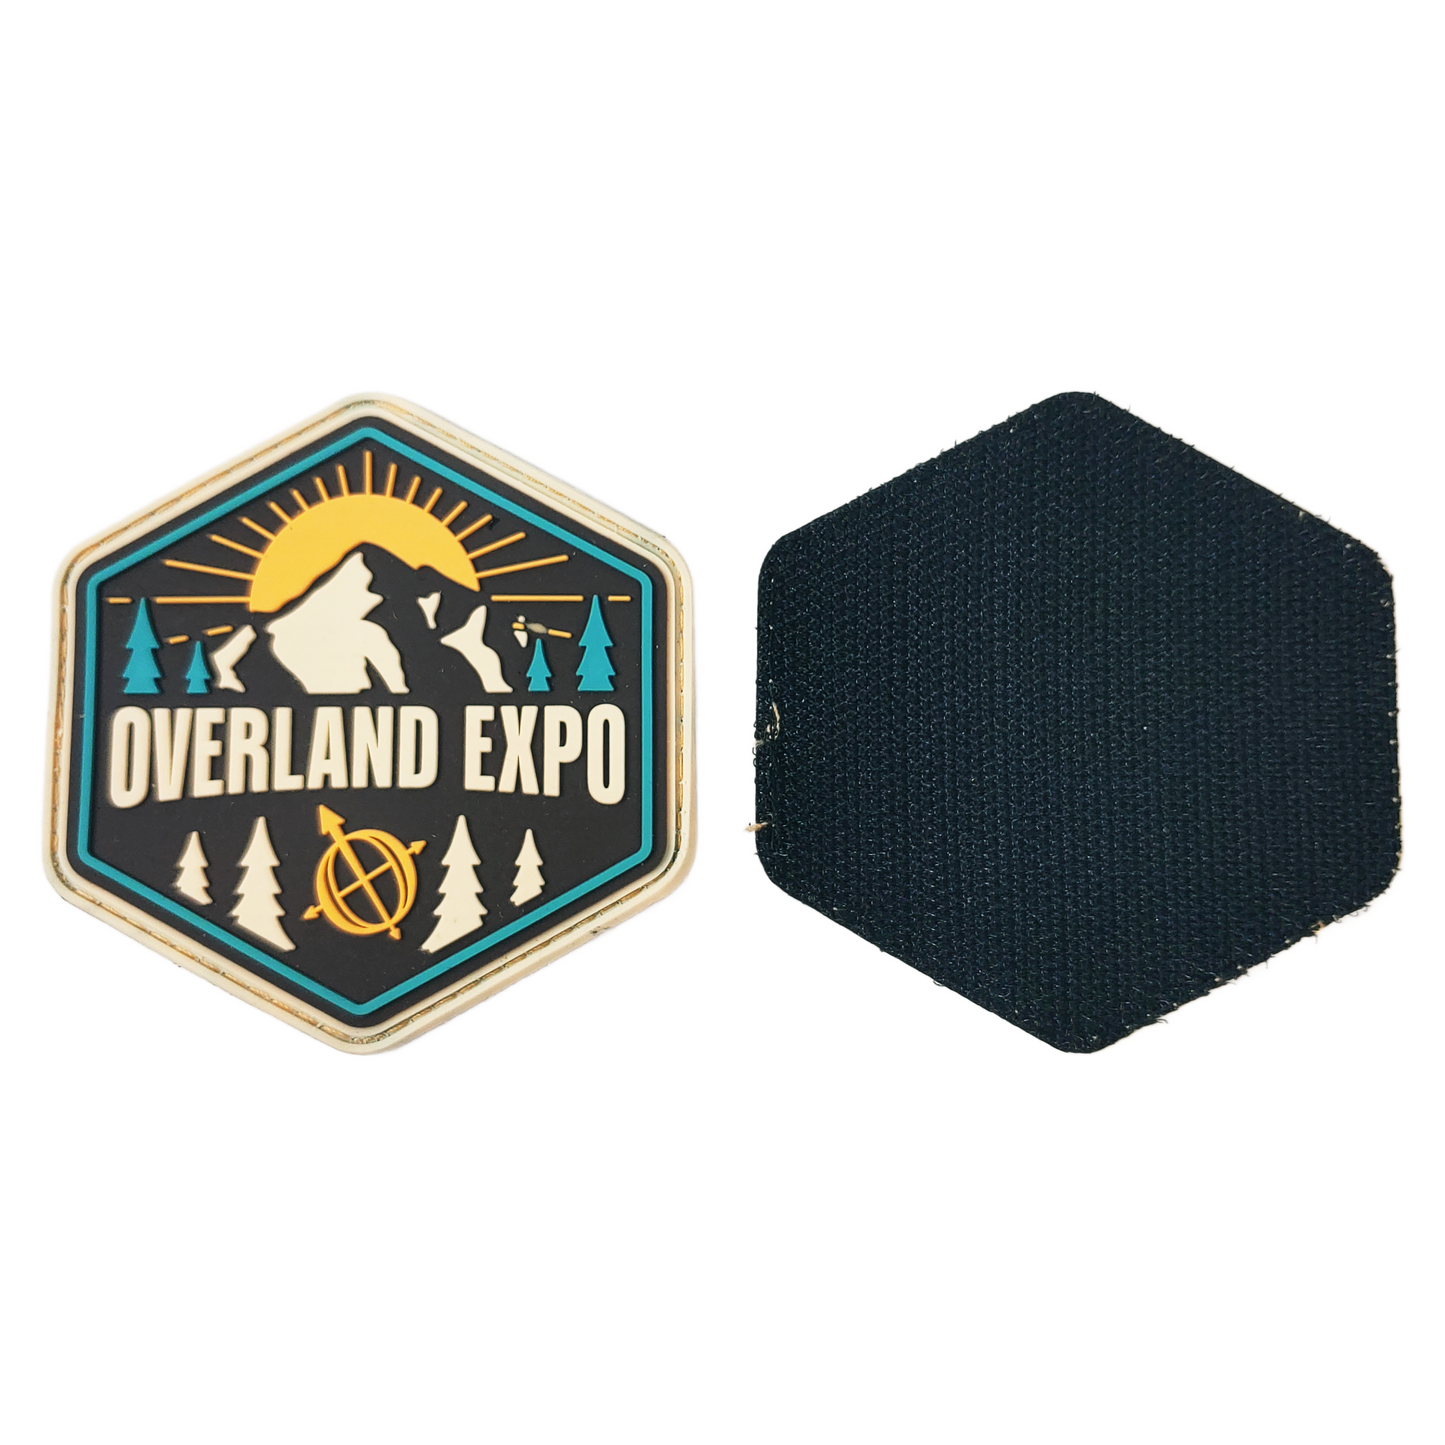 Overland Expo - Rubber Mountain Patch - Velcro Patch